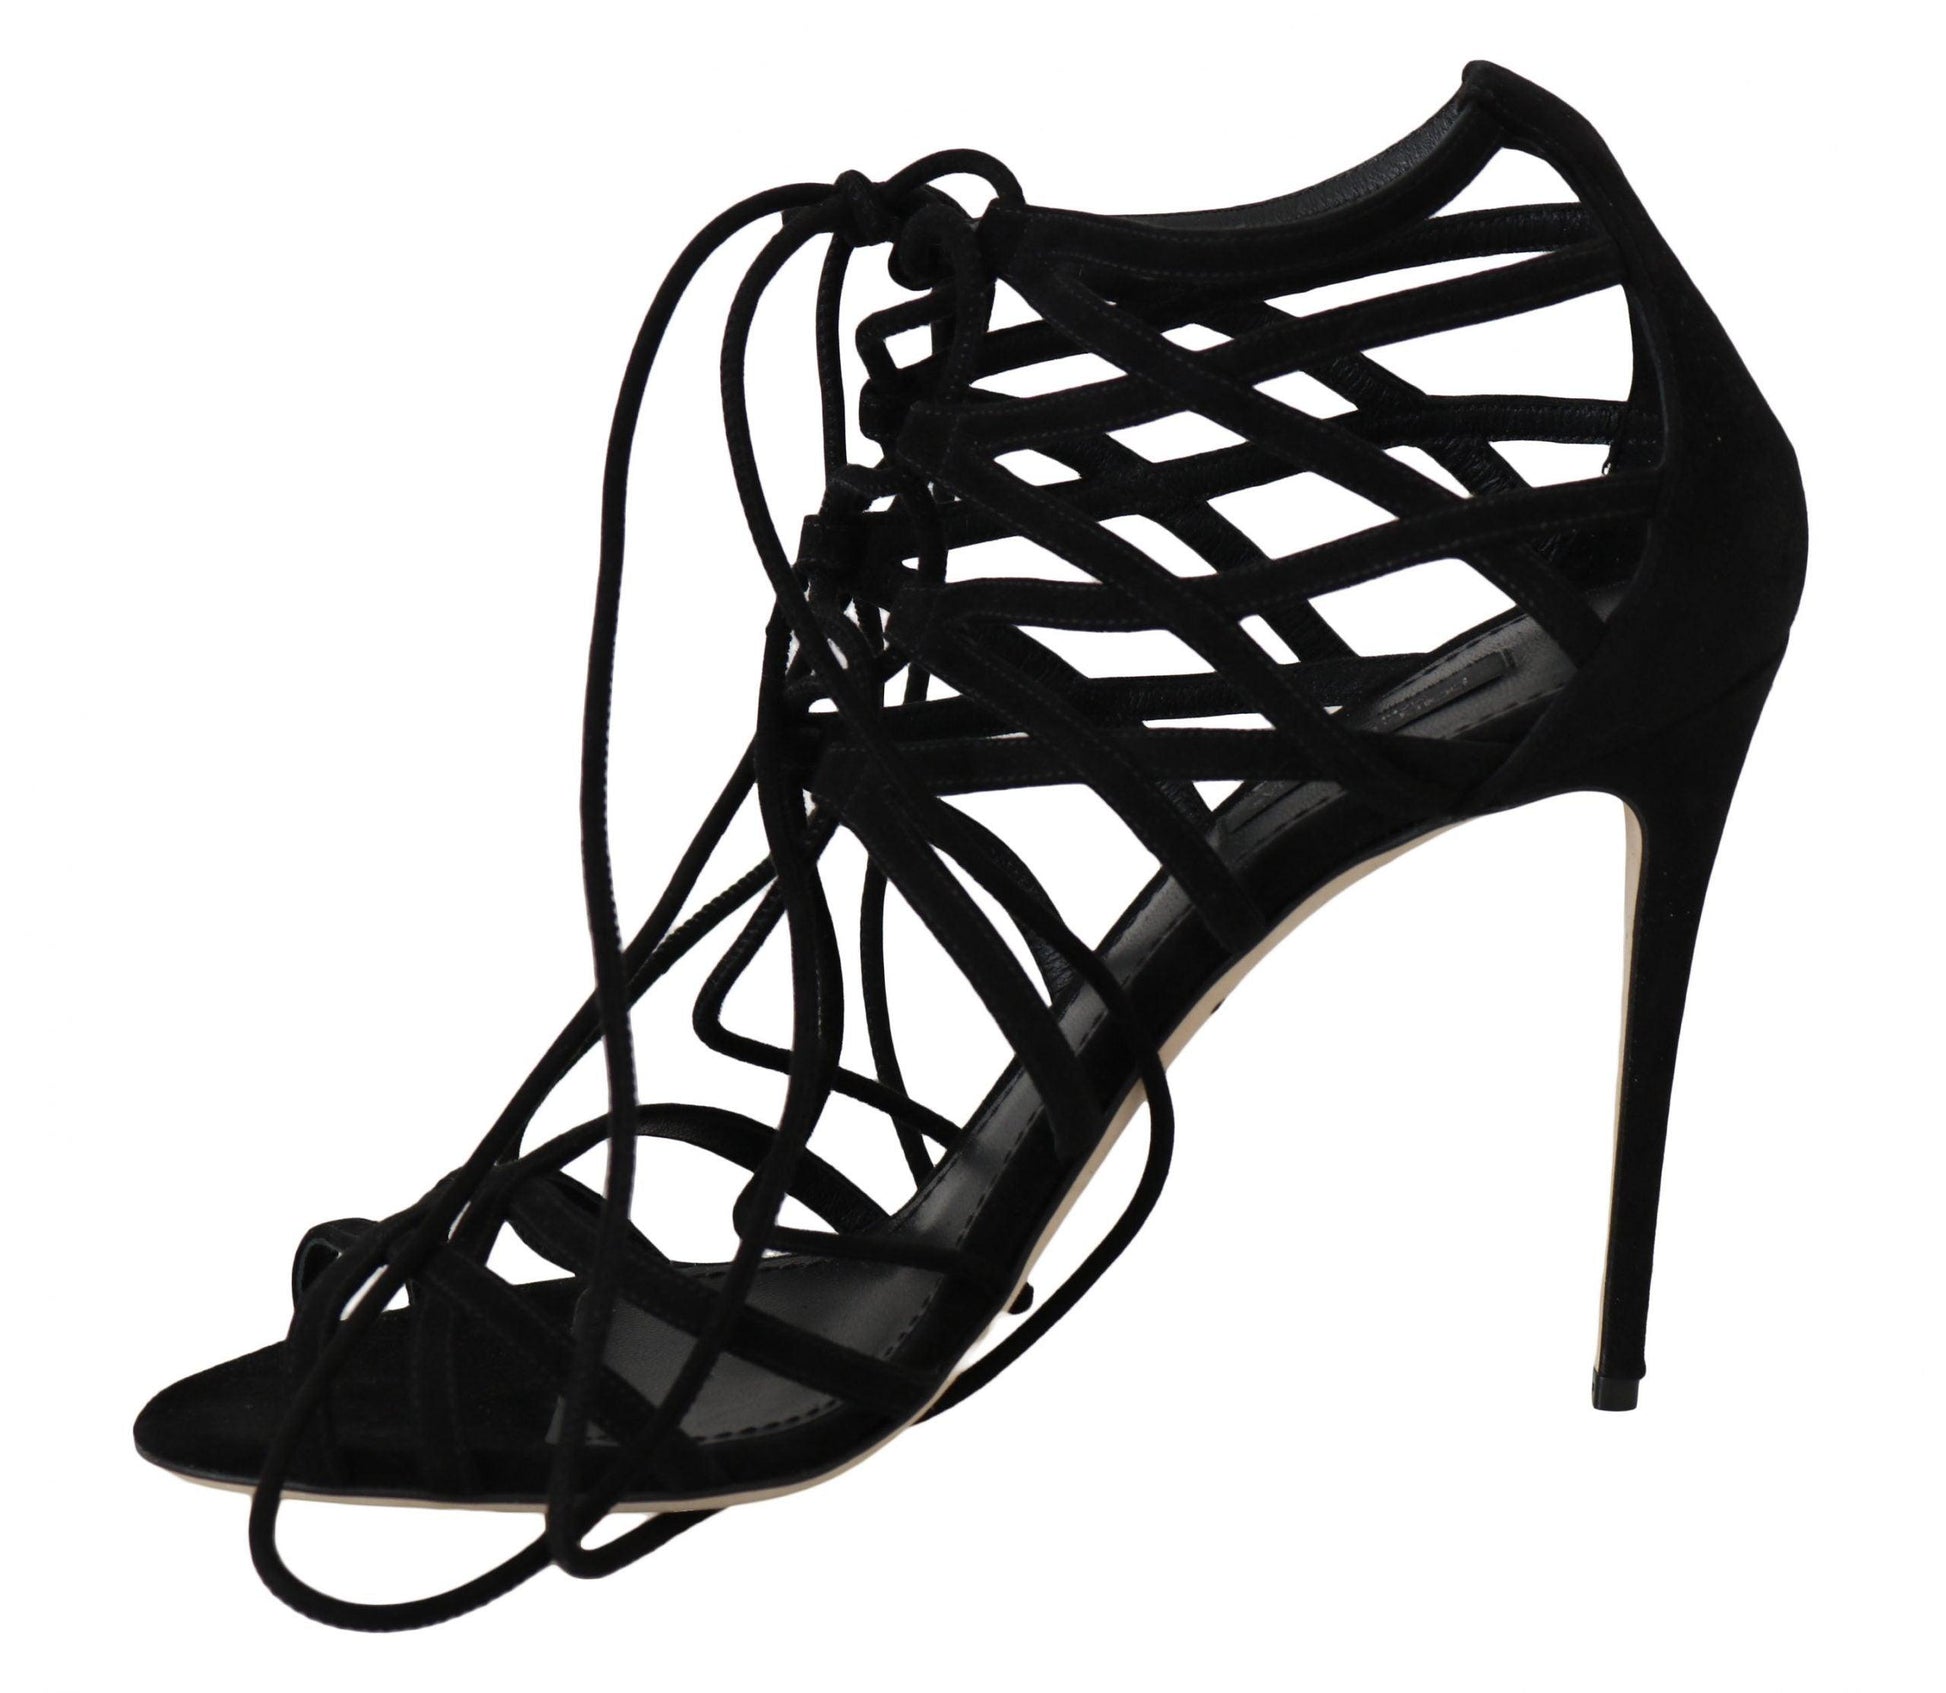 Black Suede Strap Stilettos Sandals - Designed by Dolce & Gabbana Available to Buy at a Discounted Price on Moon Behind The Hill Online Designer Discount Store